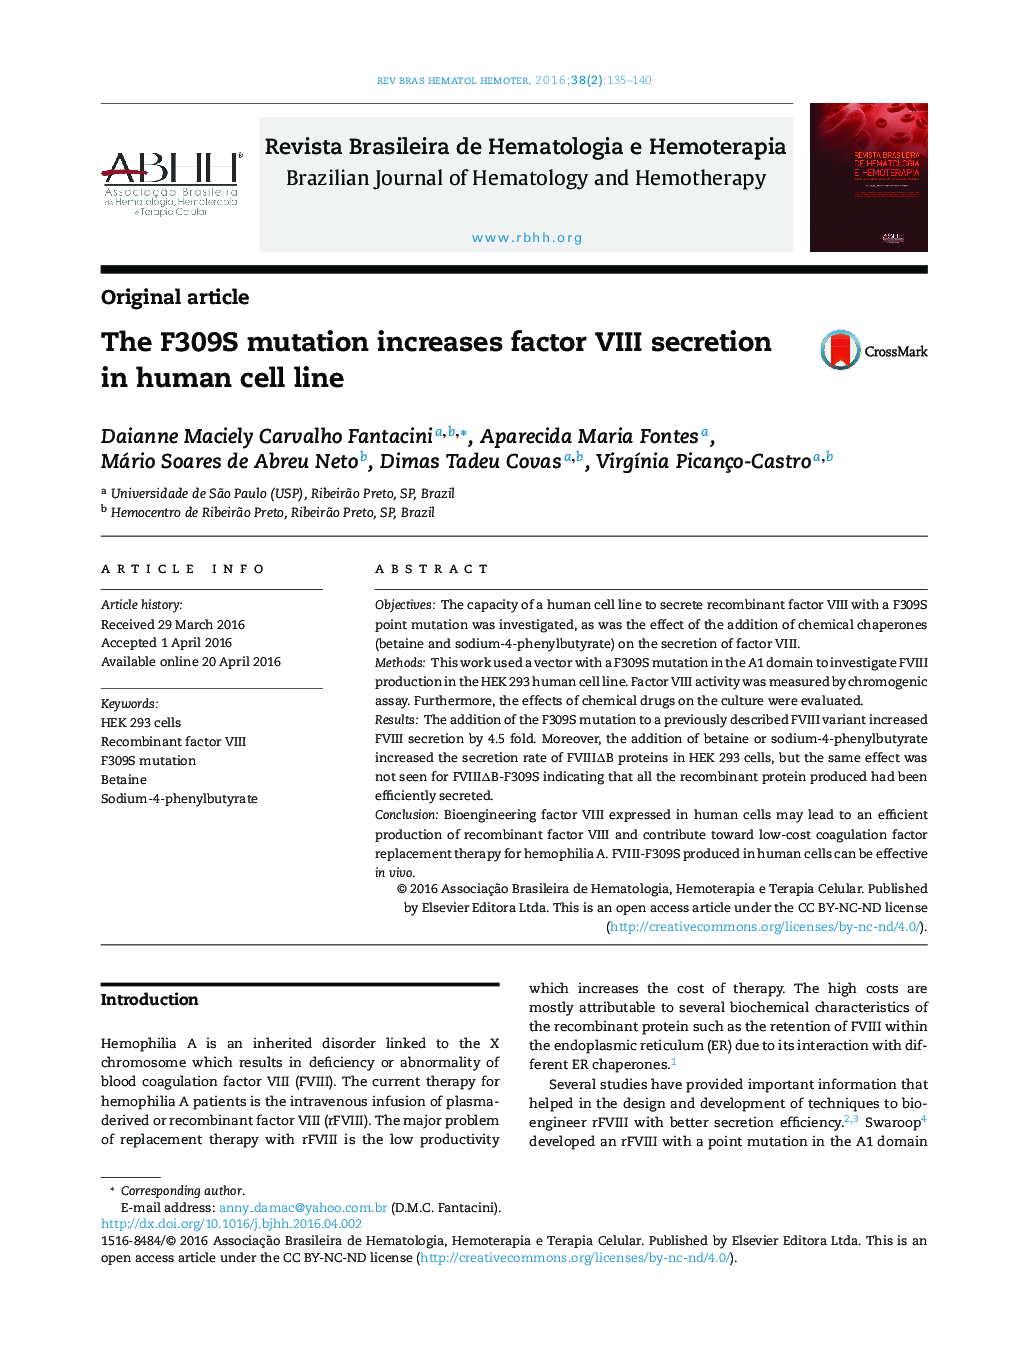 The F309S mutation increases factor VIII secretion in human cell line